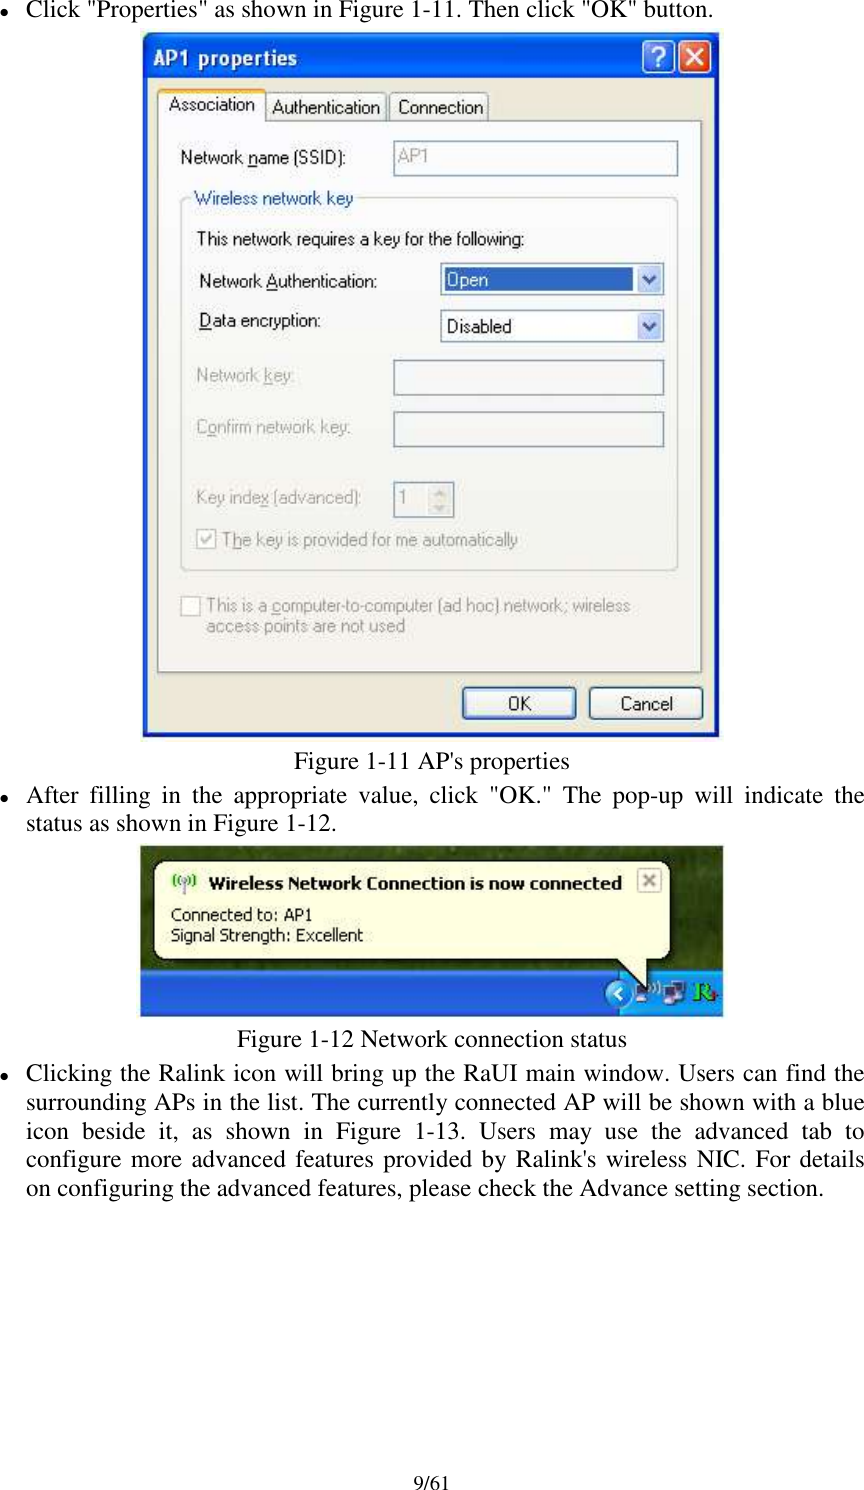 9/61Click &quot;Properties&quot; as shown in Figure 1-11. Then click &quot;OK&quot; button.Figure 1-11 AP&apos;s propertiesAfter filling in the appropriate value, click &quot;OK.&quot; The pop-up will indicate thestatus as shown in Figure 1-12.Figure 1-12 Network connection statusClicking the Ralink icon will bring up the RaUI main window. Users can find thesurrounding APs in the list. The currently connected AP will be shown with a blueicon beside it, as shown in Figure 1-13. Users may use the advanced tab toconfigure more advanced features provided by Ralink&apos;s wireless NIC. For detailson configuring the advanced features, please check the Advance setting section.